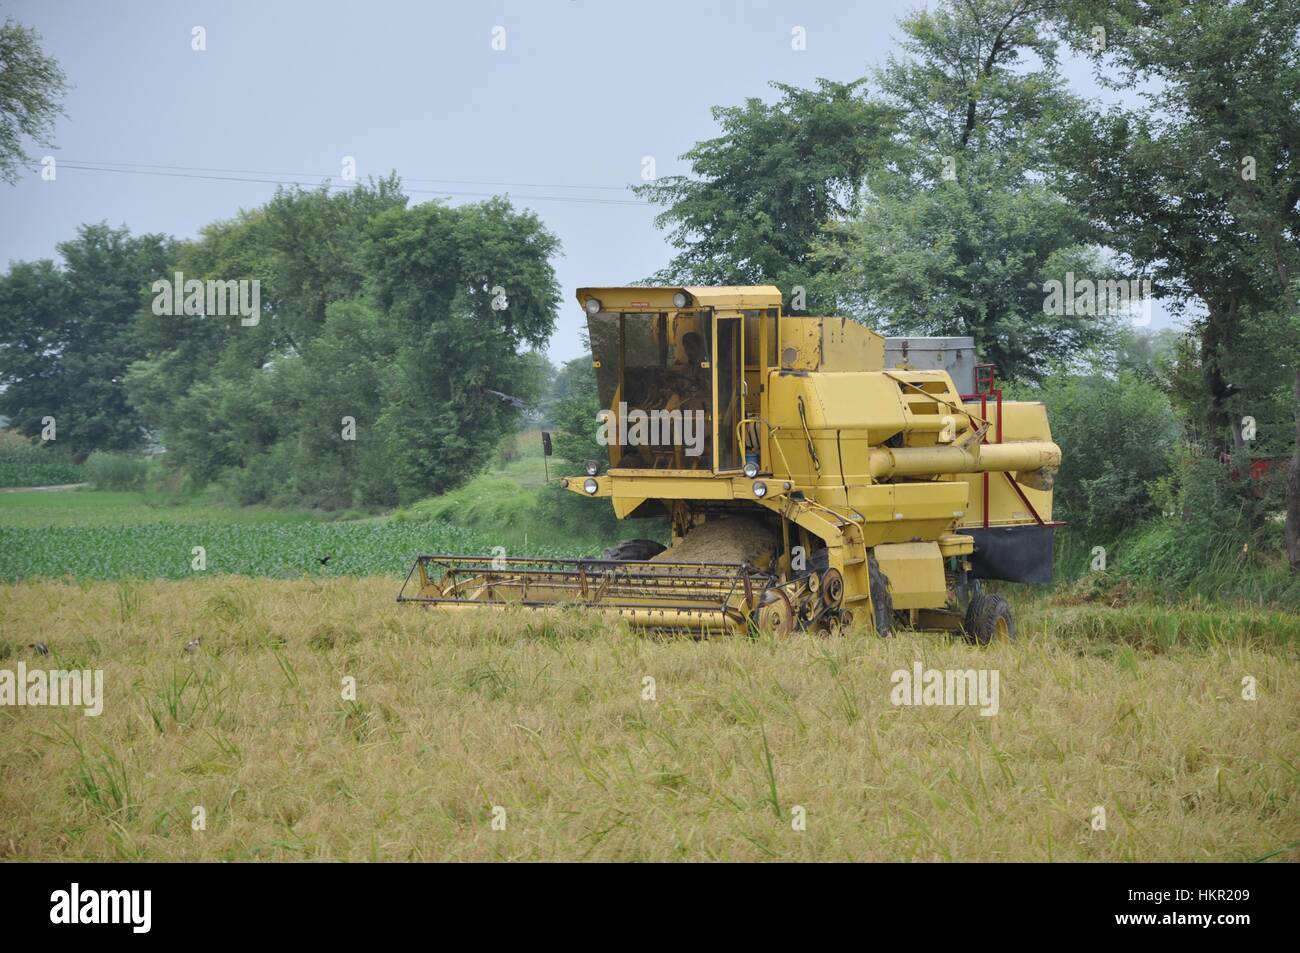 Farmer harvesting fields on a harvesting machine at evening Stock Photo